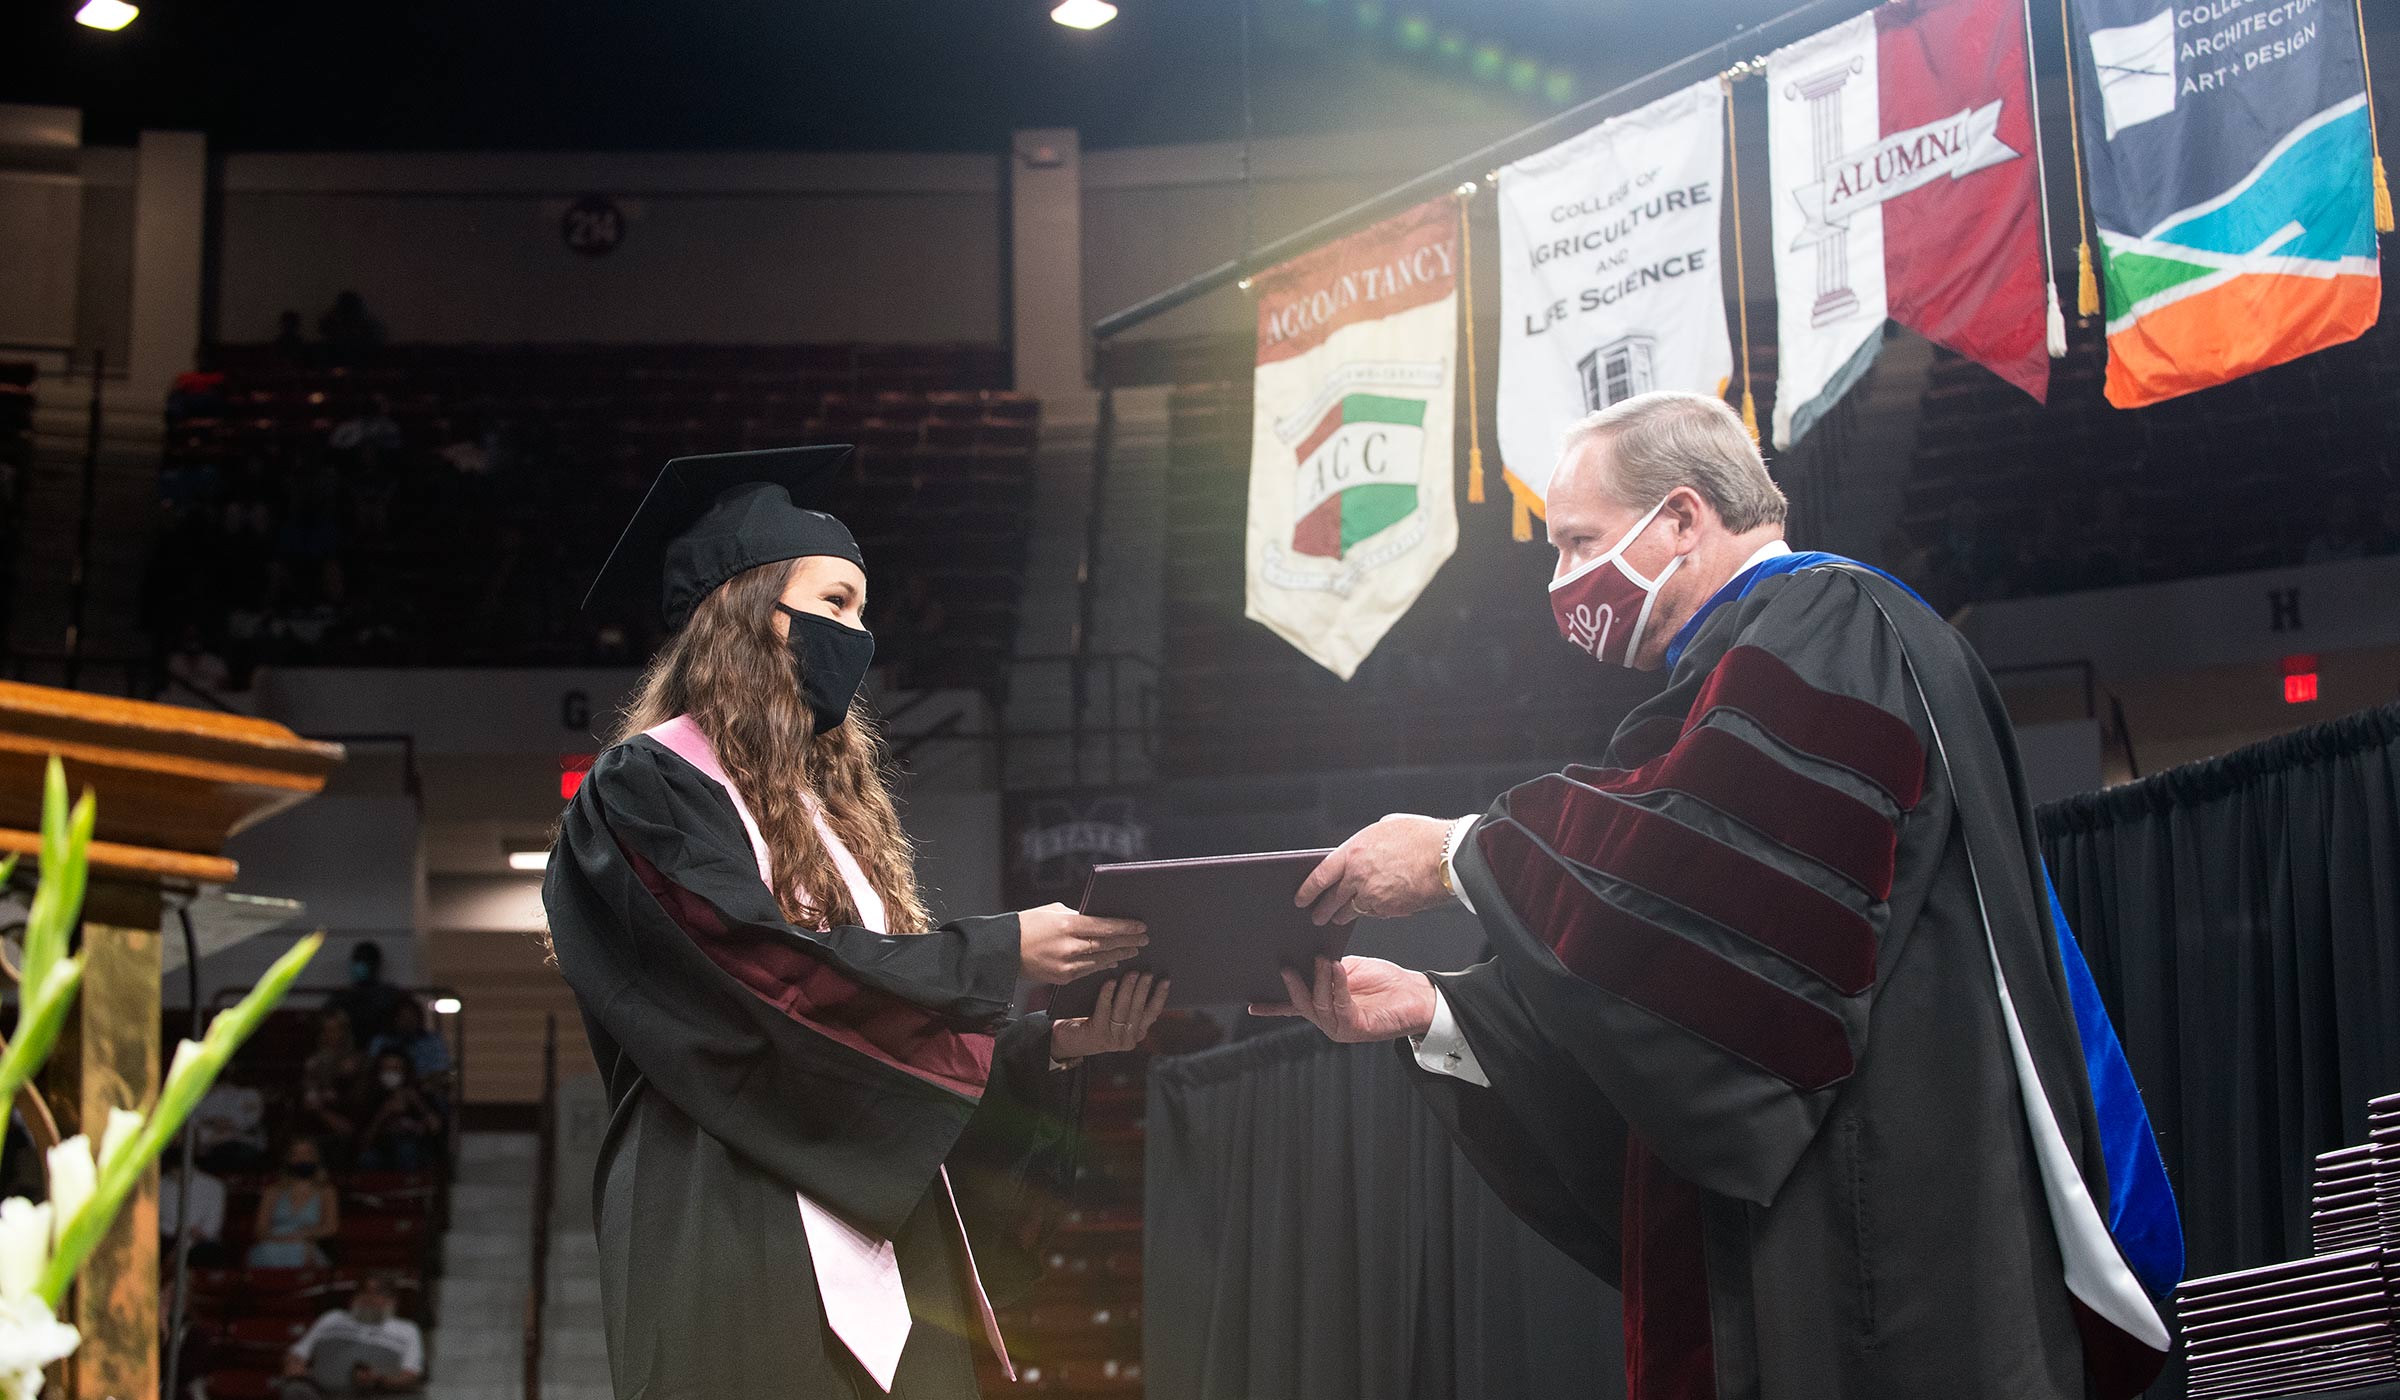 Female in black and maroon graduation regalia accepting diploma from man in doctoral robes